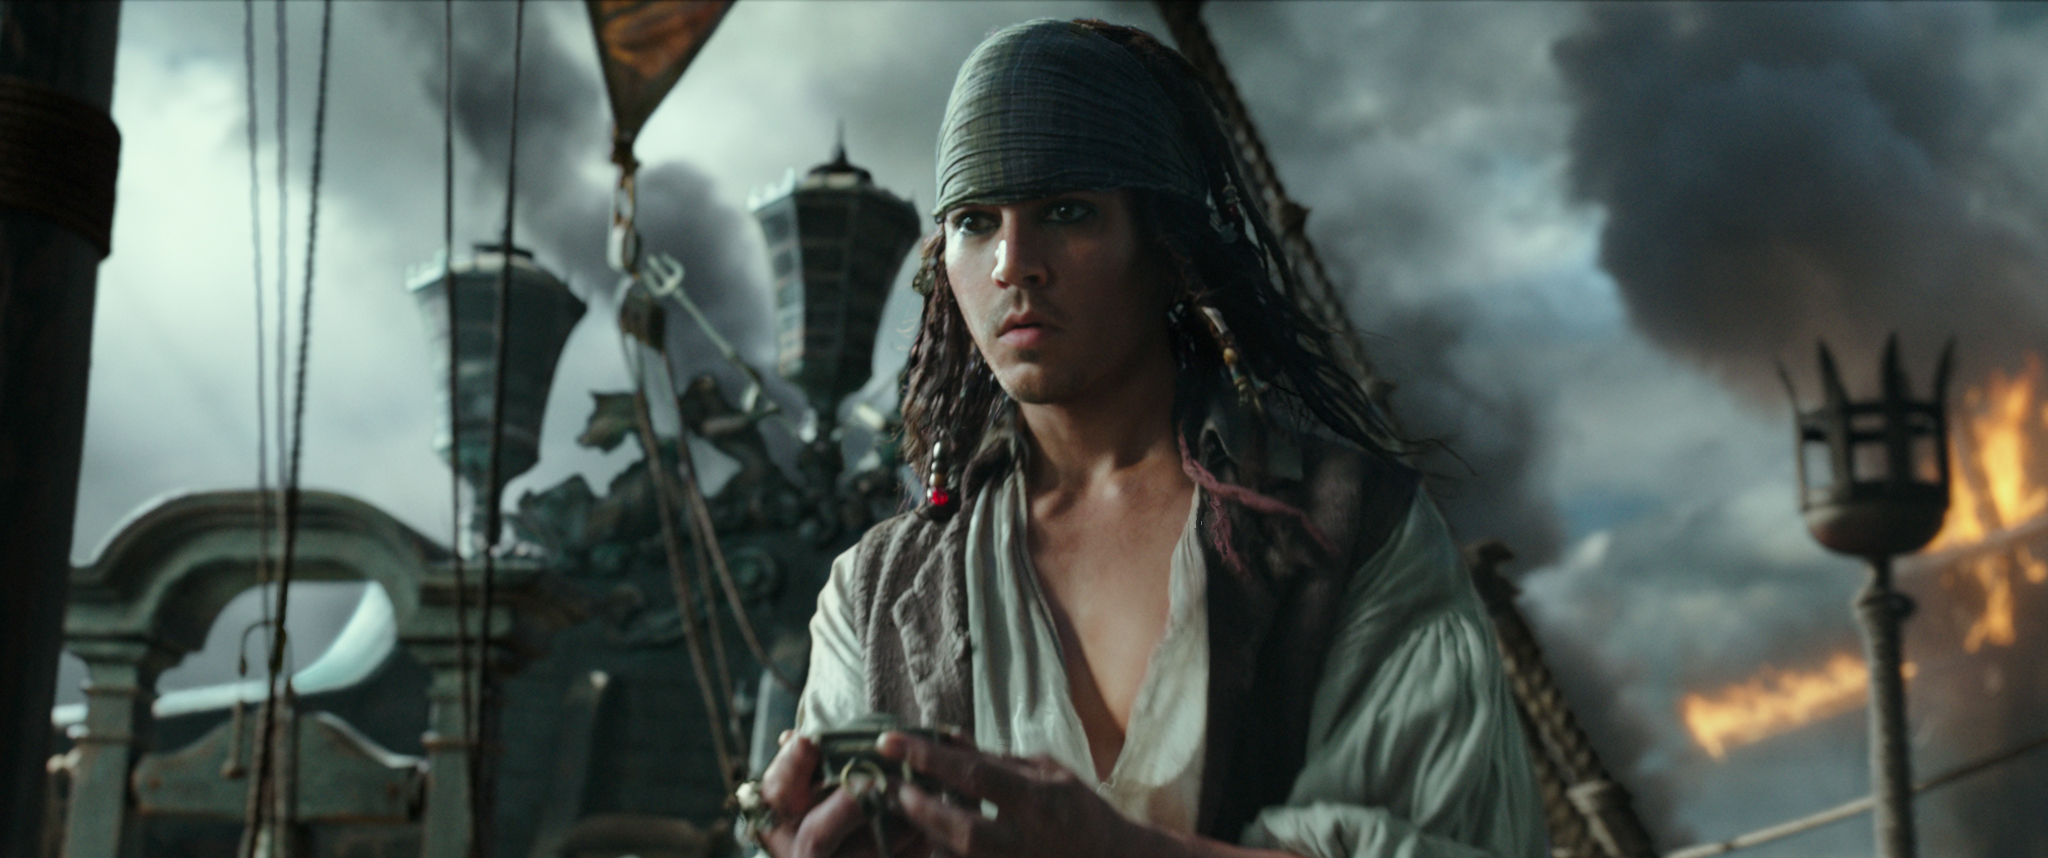 Pirates of the Caribbean: Dead Men Tell No Tales – NEW Trailer Available